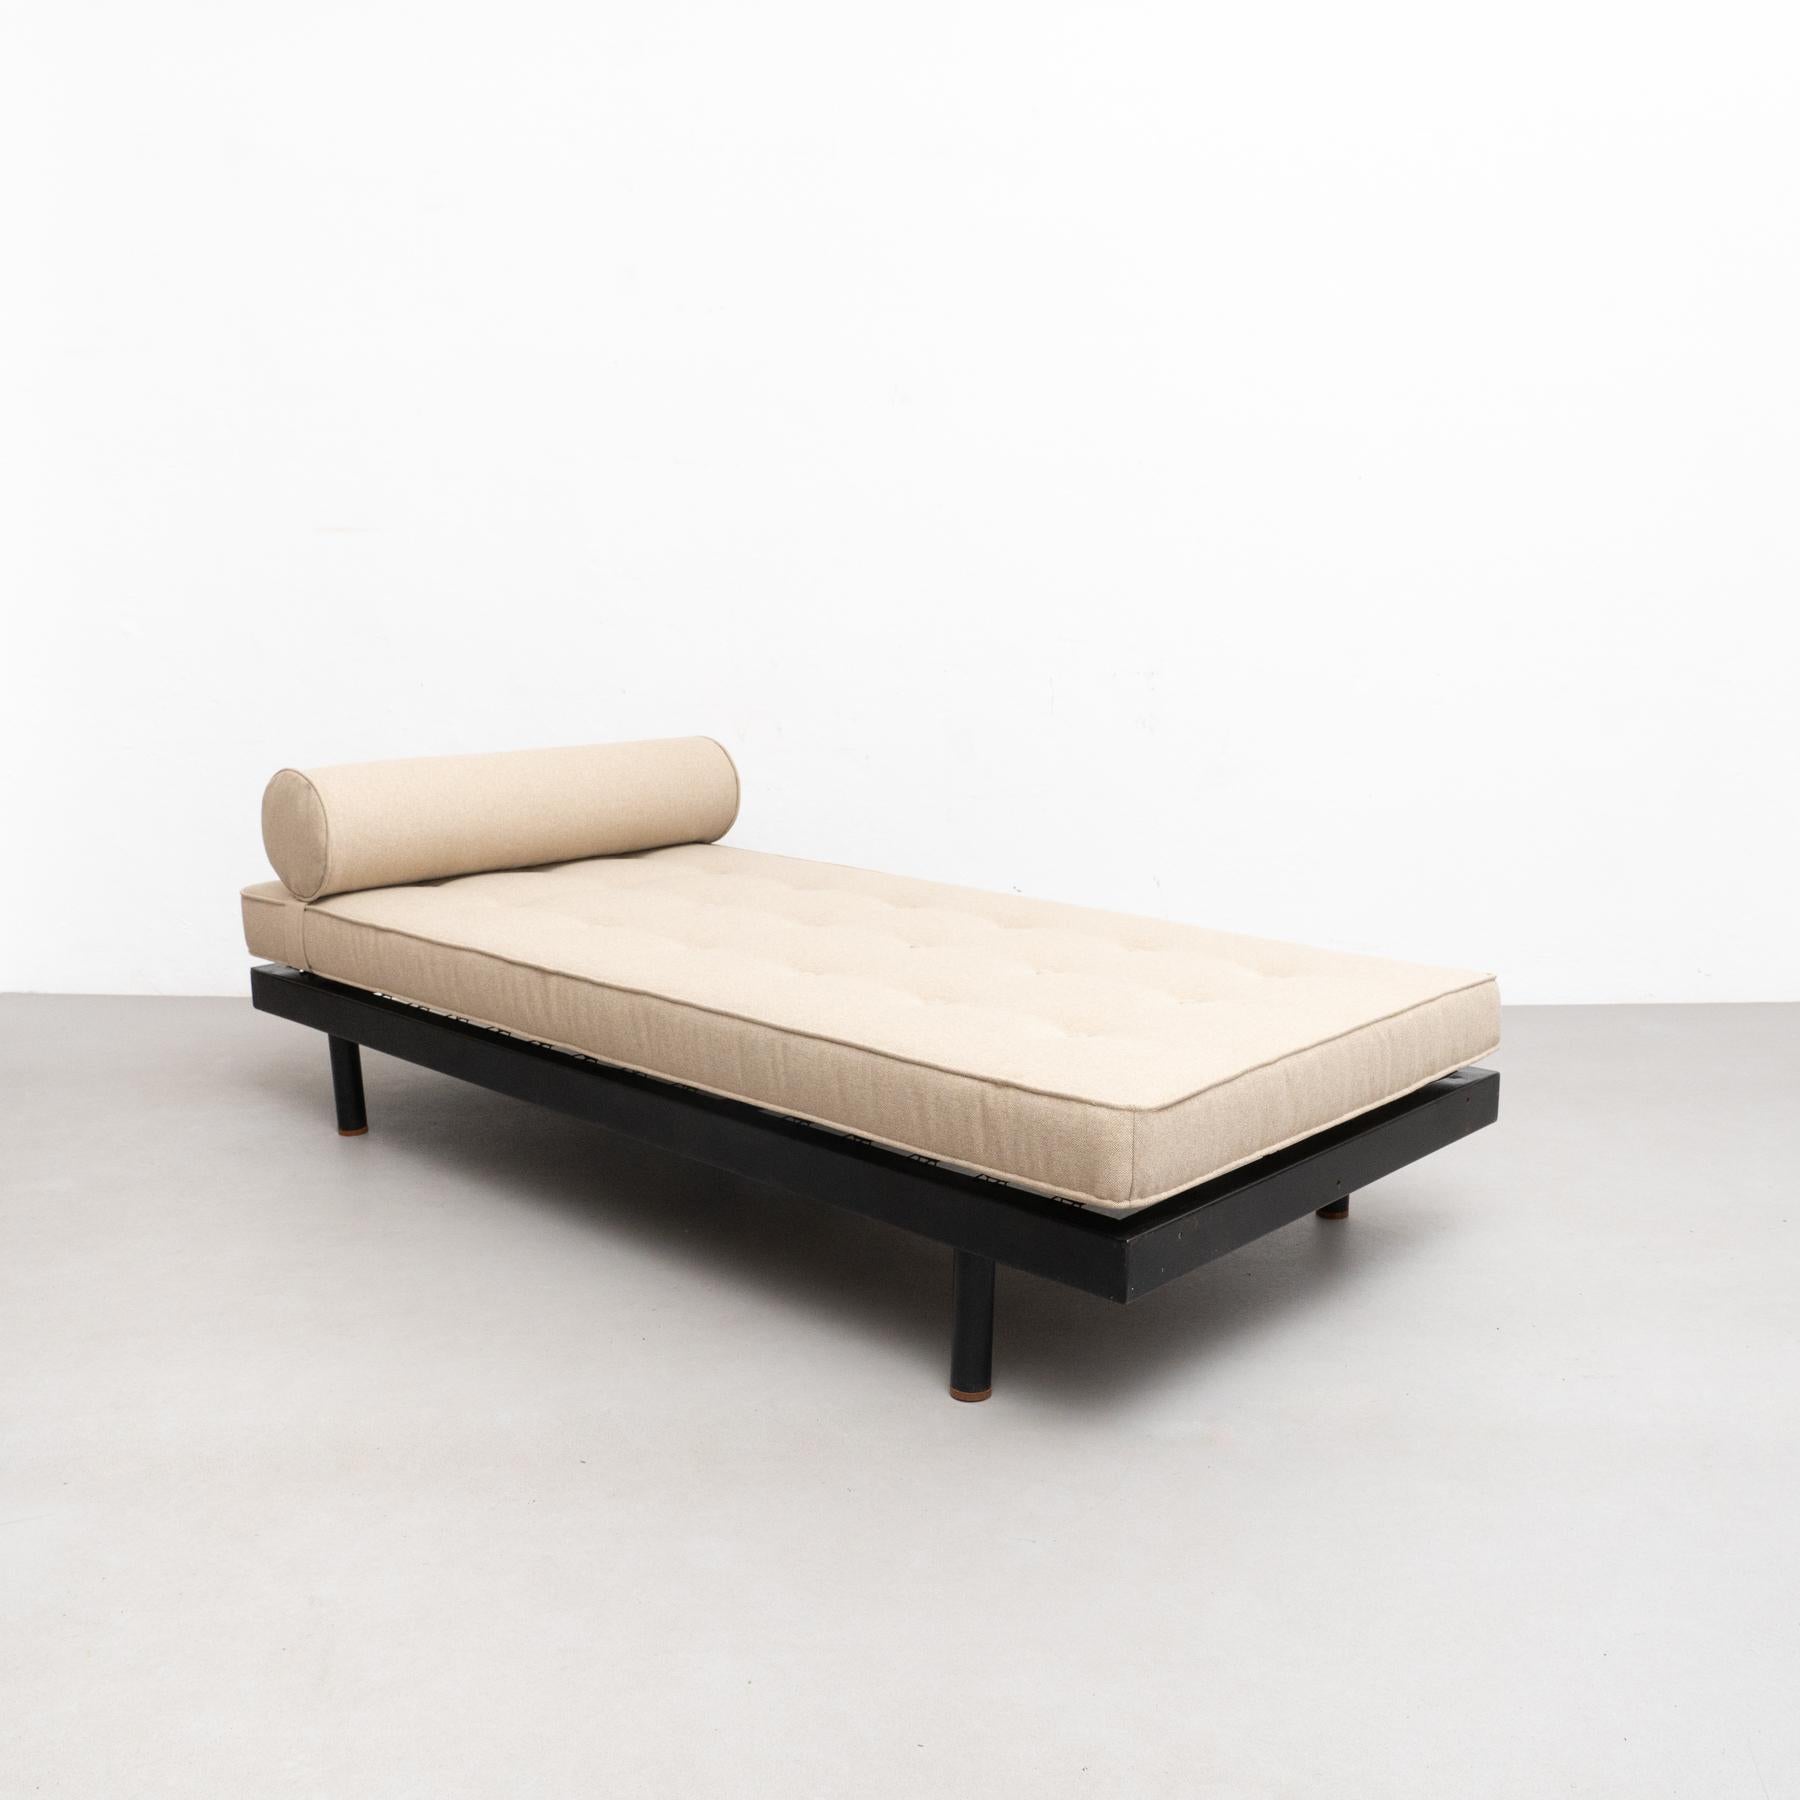 French Jean Prouve Mid-Century Modern S.C.A.L. Daybed, circa 1950